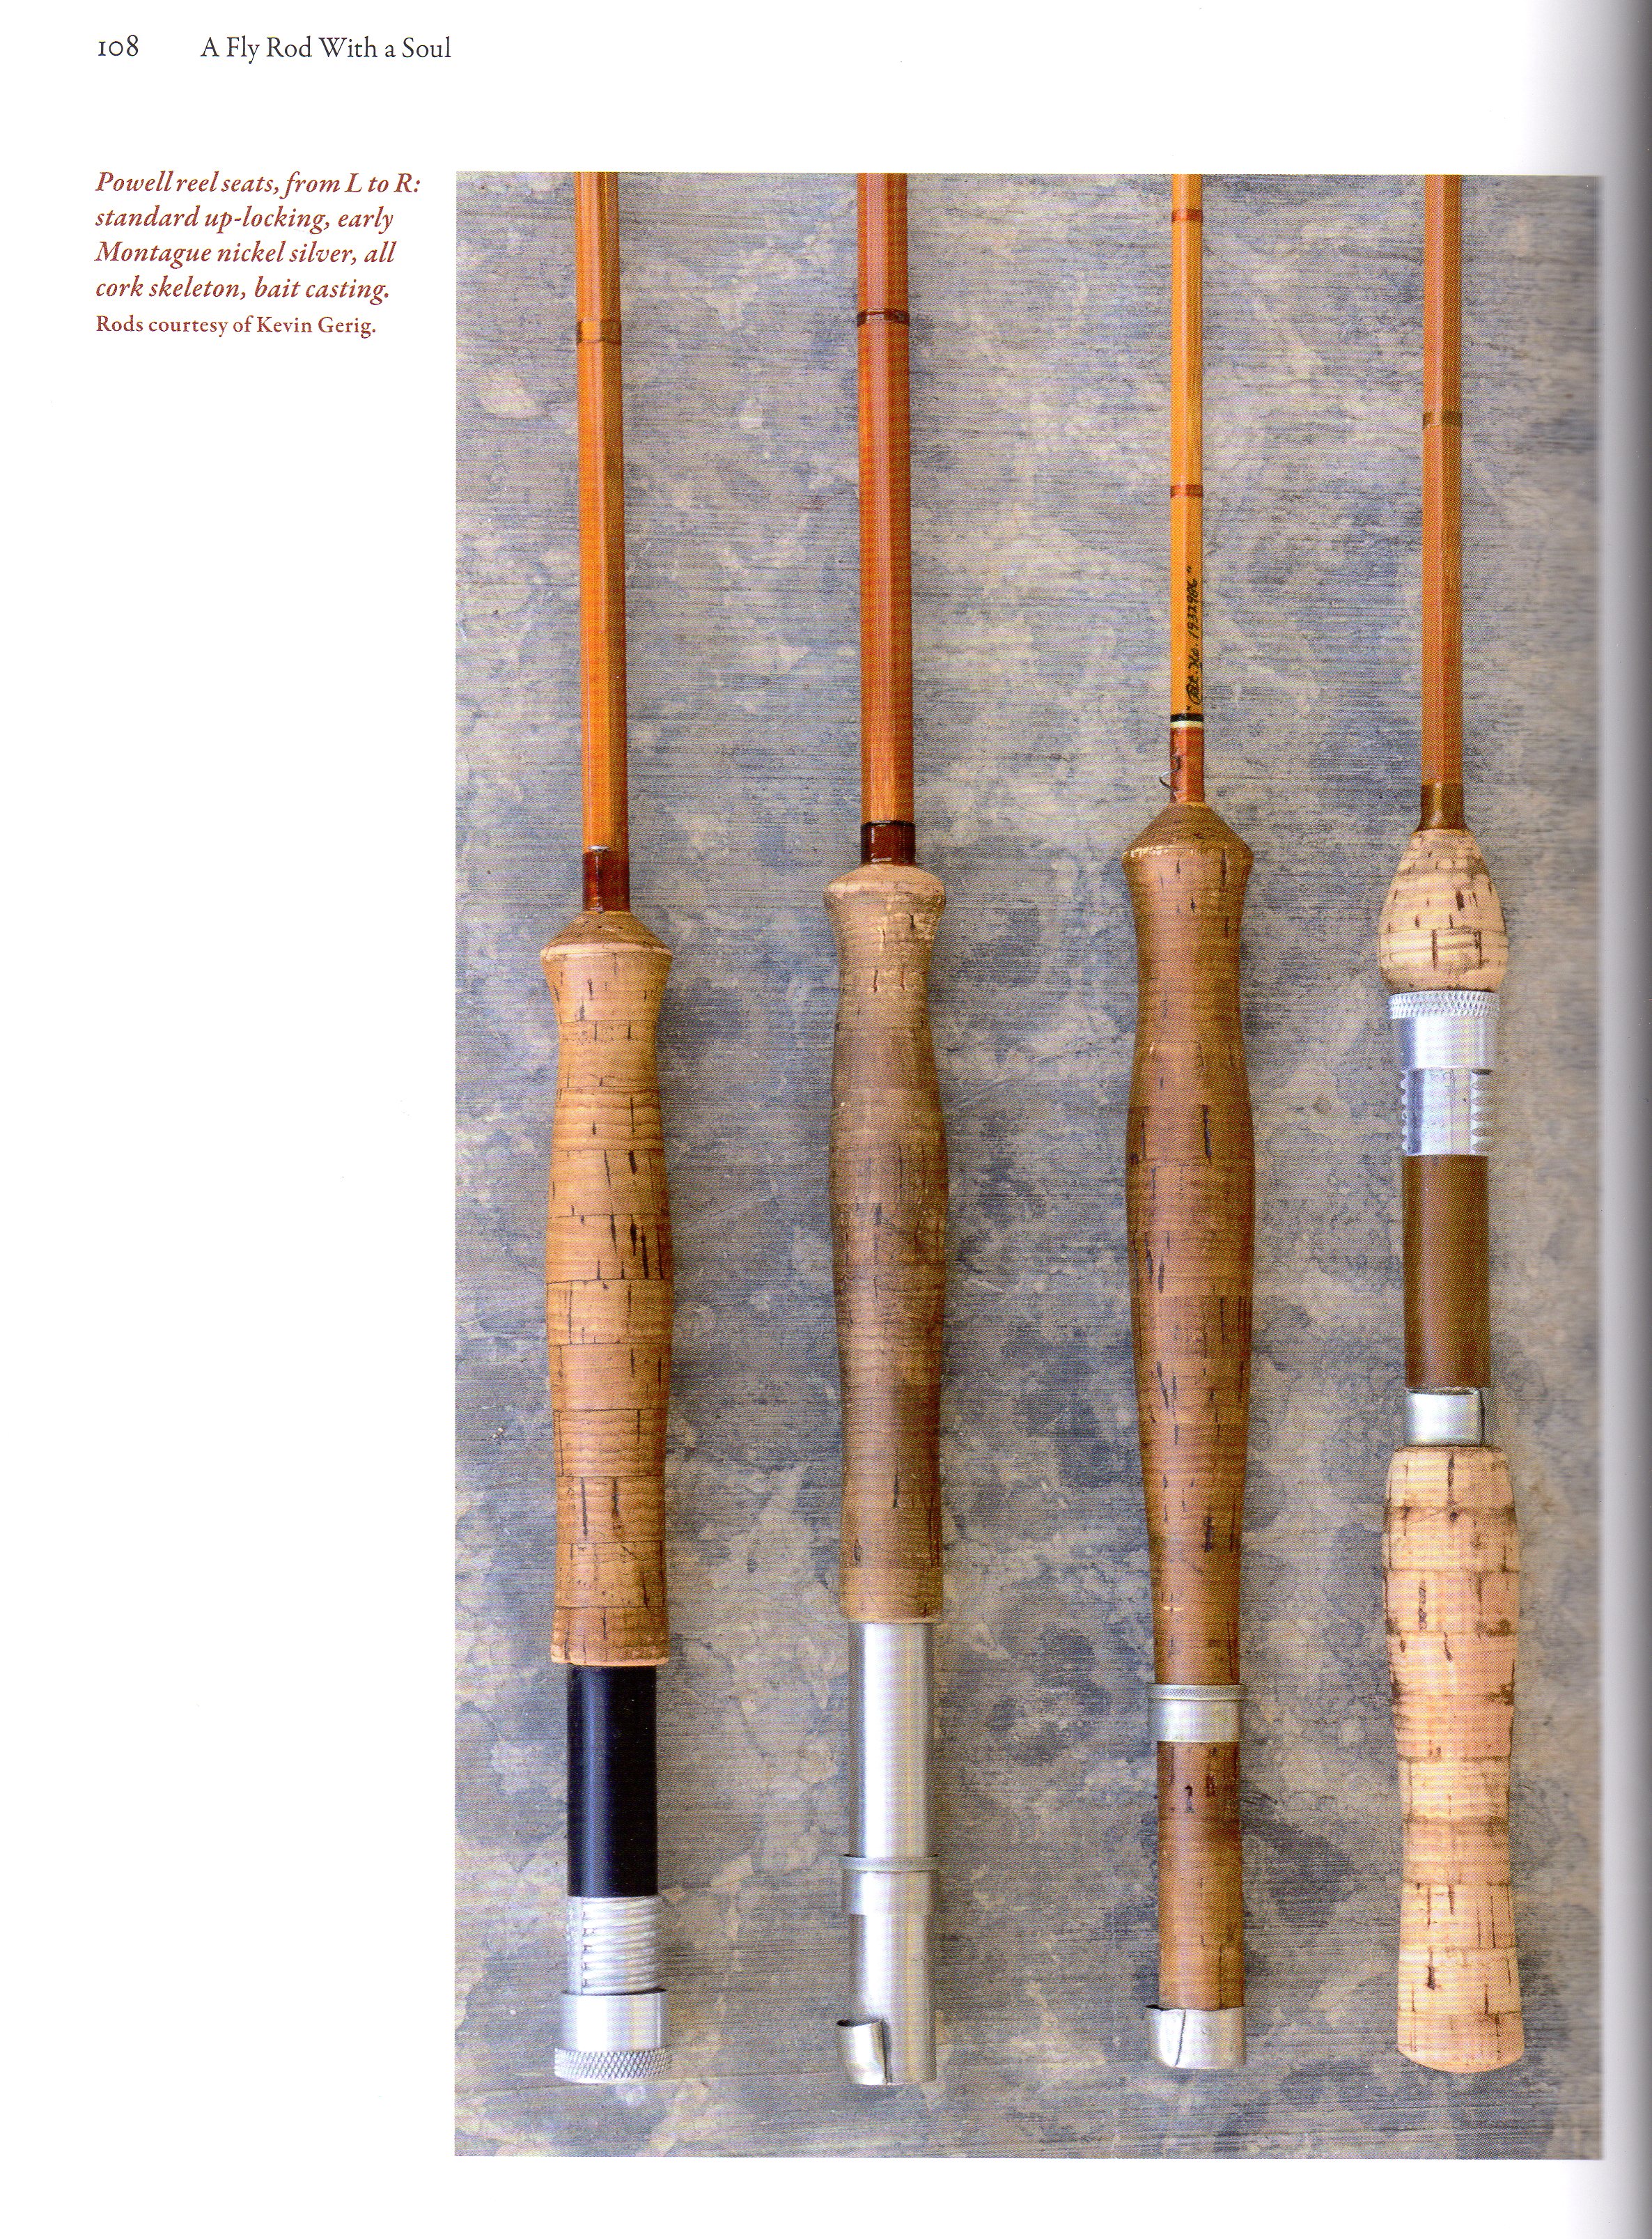 A Fly Rod With a Soul: The Bamboo Fishing